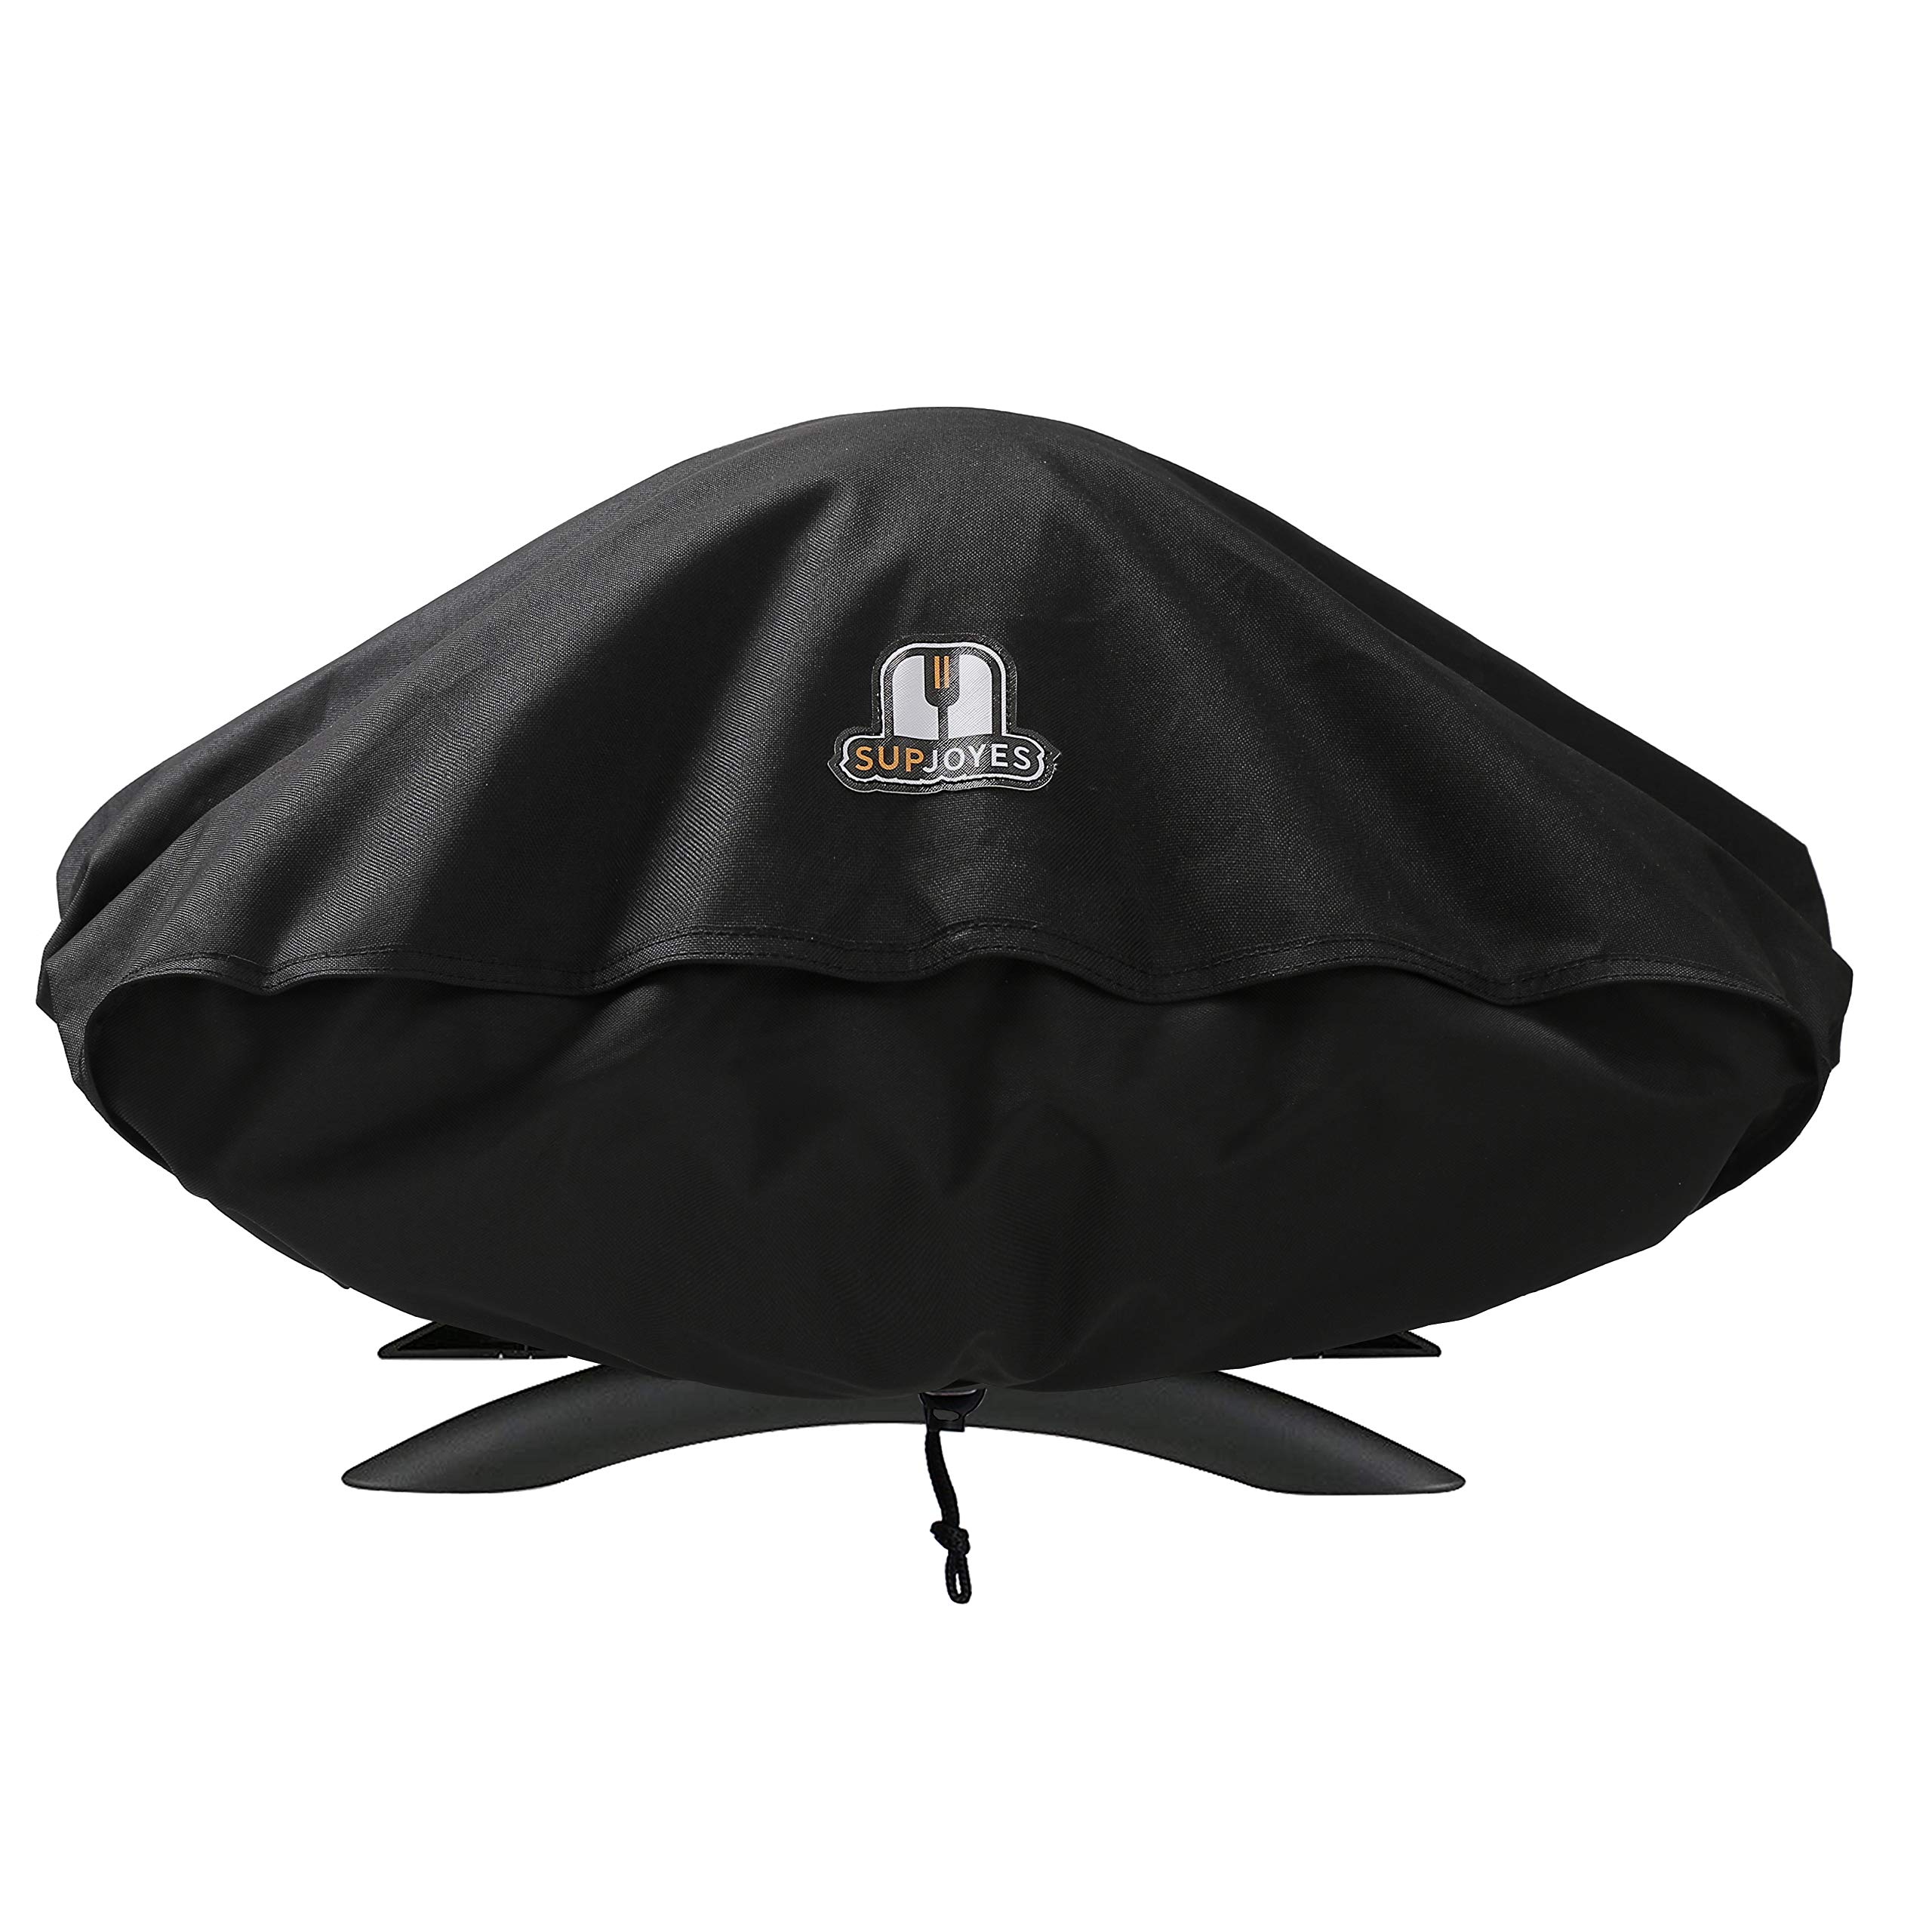 Supjoyes Grill Cover For Weber Q Series Grill, Portable Grill Cover For Weber Q2000 And Q200 Grills (Not Fit For Weber Q2200)